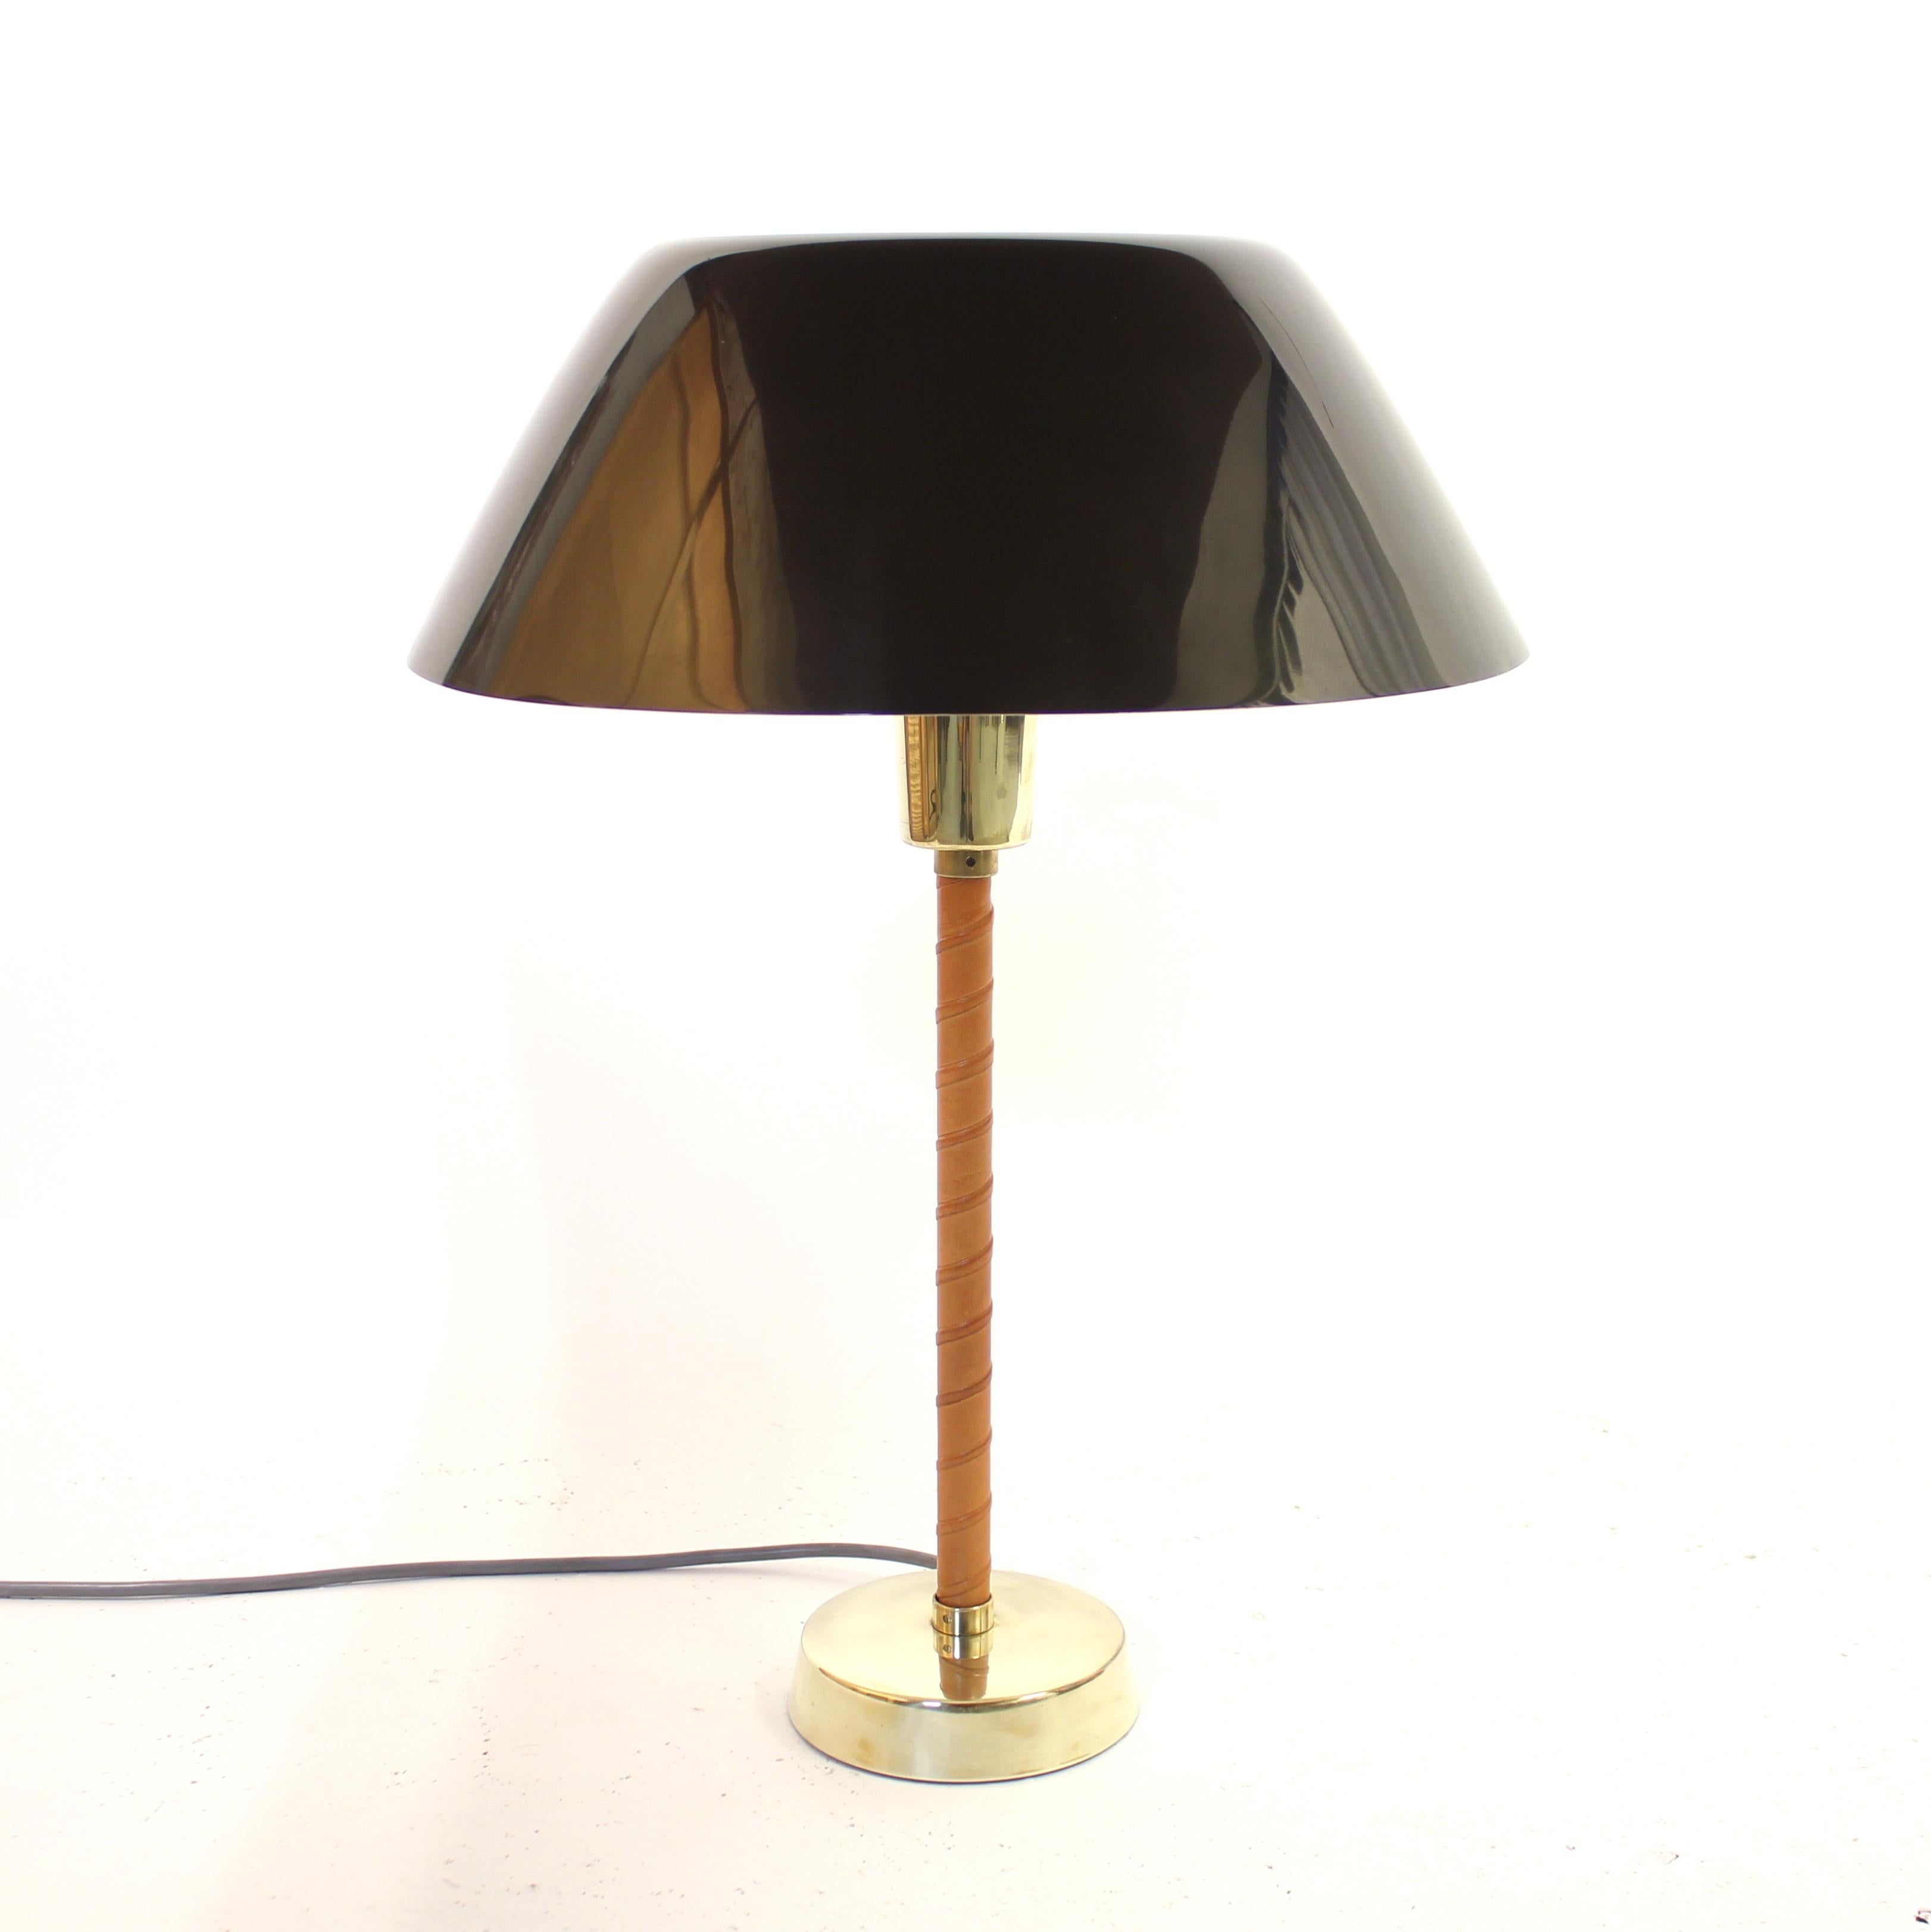 Senator table lamp designed by Finish designer Lisa Johansson-Pape for her long time collaborator Orno in the 1950s. The lamp has a dark green metal shade that are held in place by an acrylic bowl/shade on the inside. Under that is a brass bulb